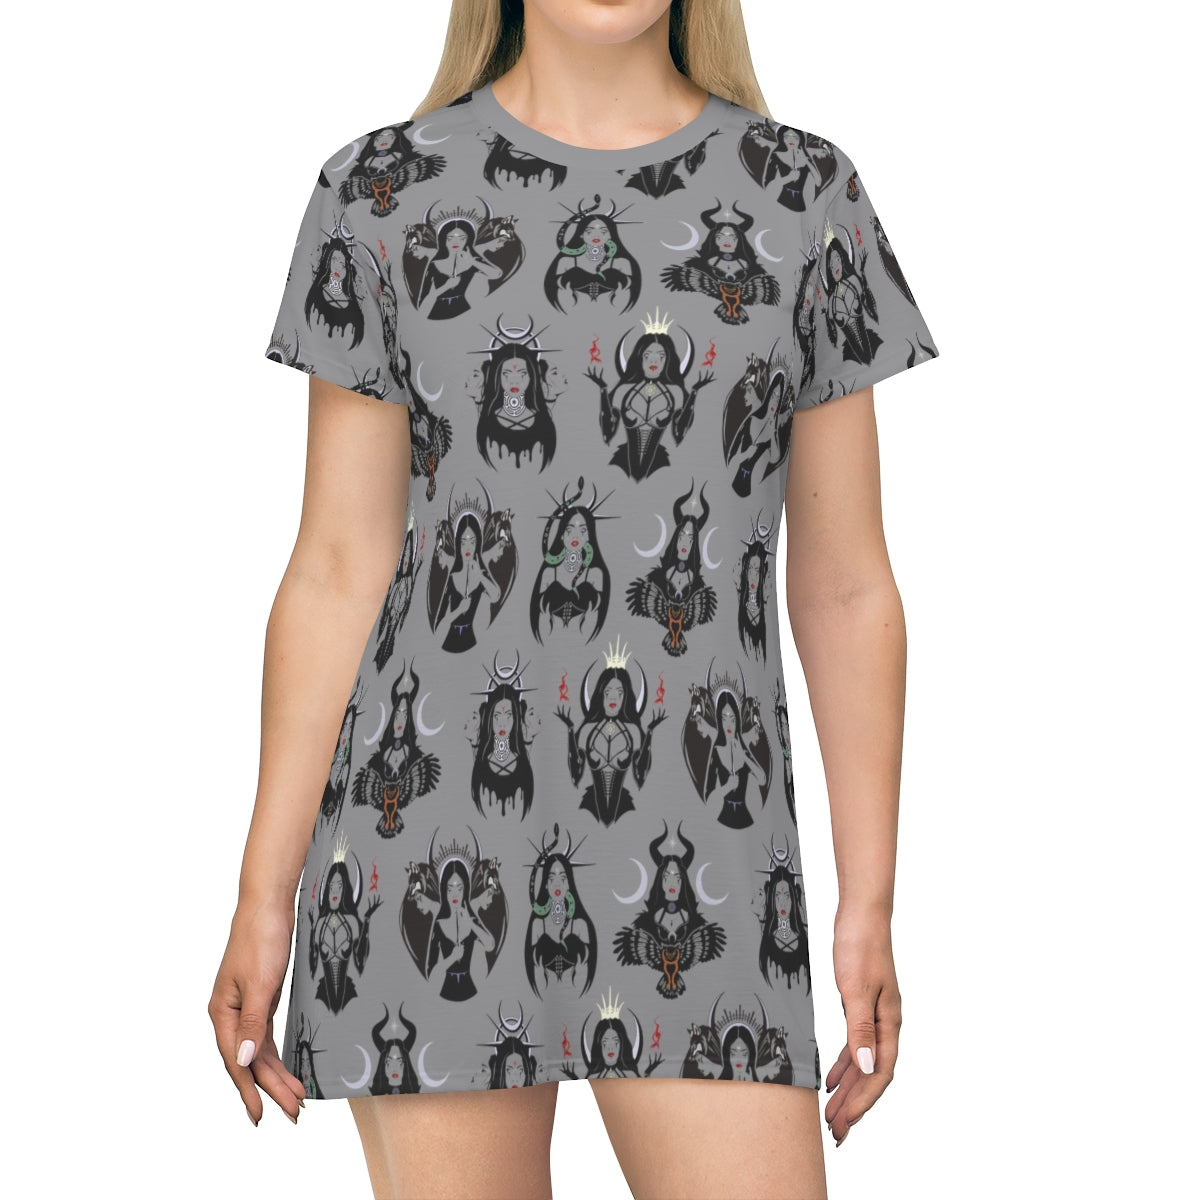 Faces Of Hekate All Over Print T-Shirt Dress